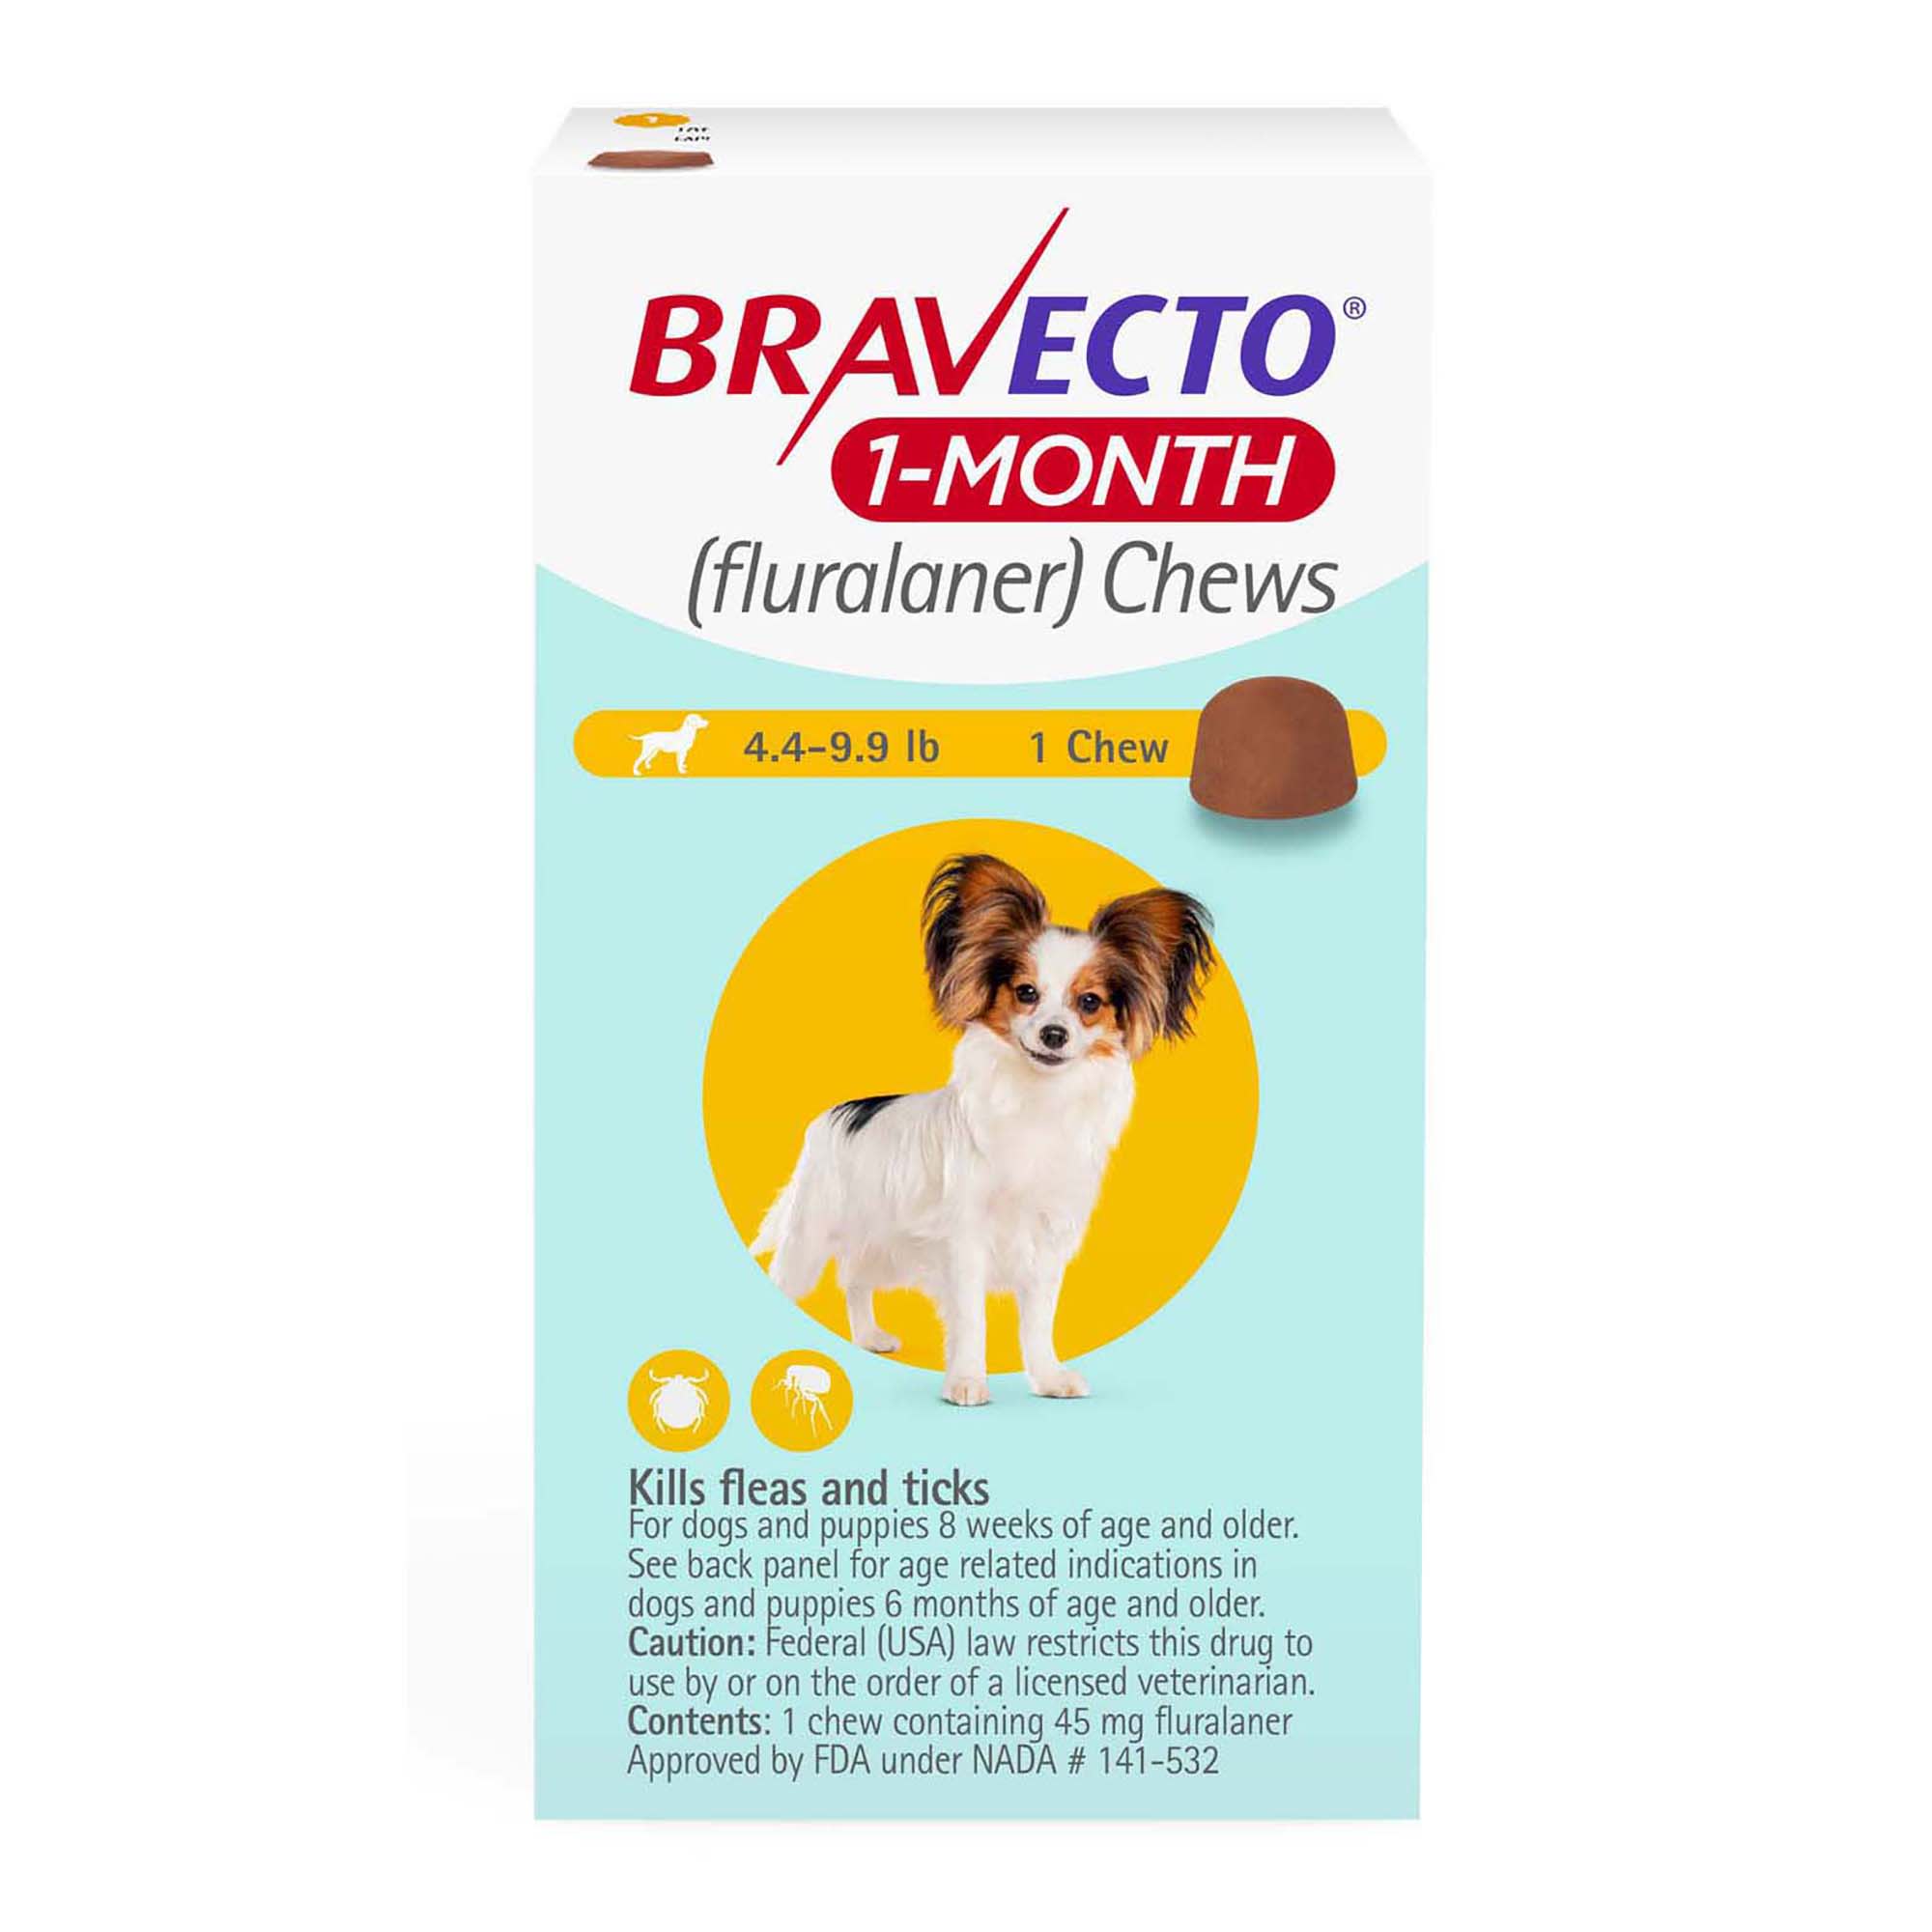 Bravecto 1-Month Chews for Dogs 4.4-9.9lbs, 1 Month Supply